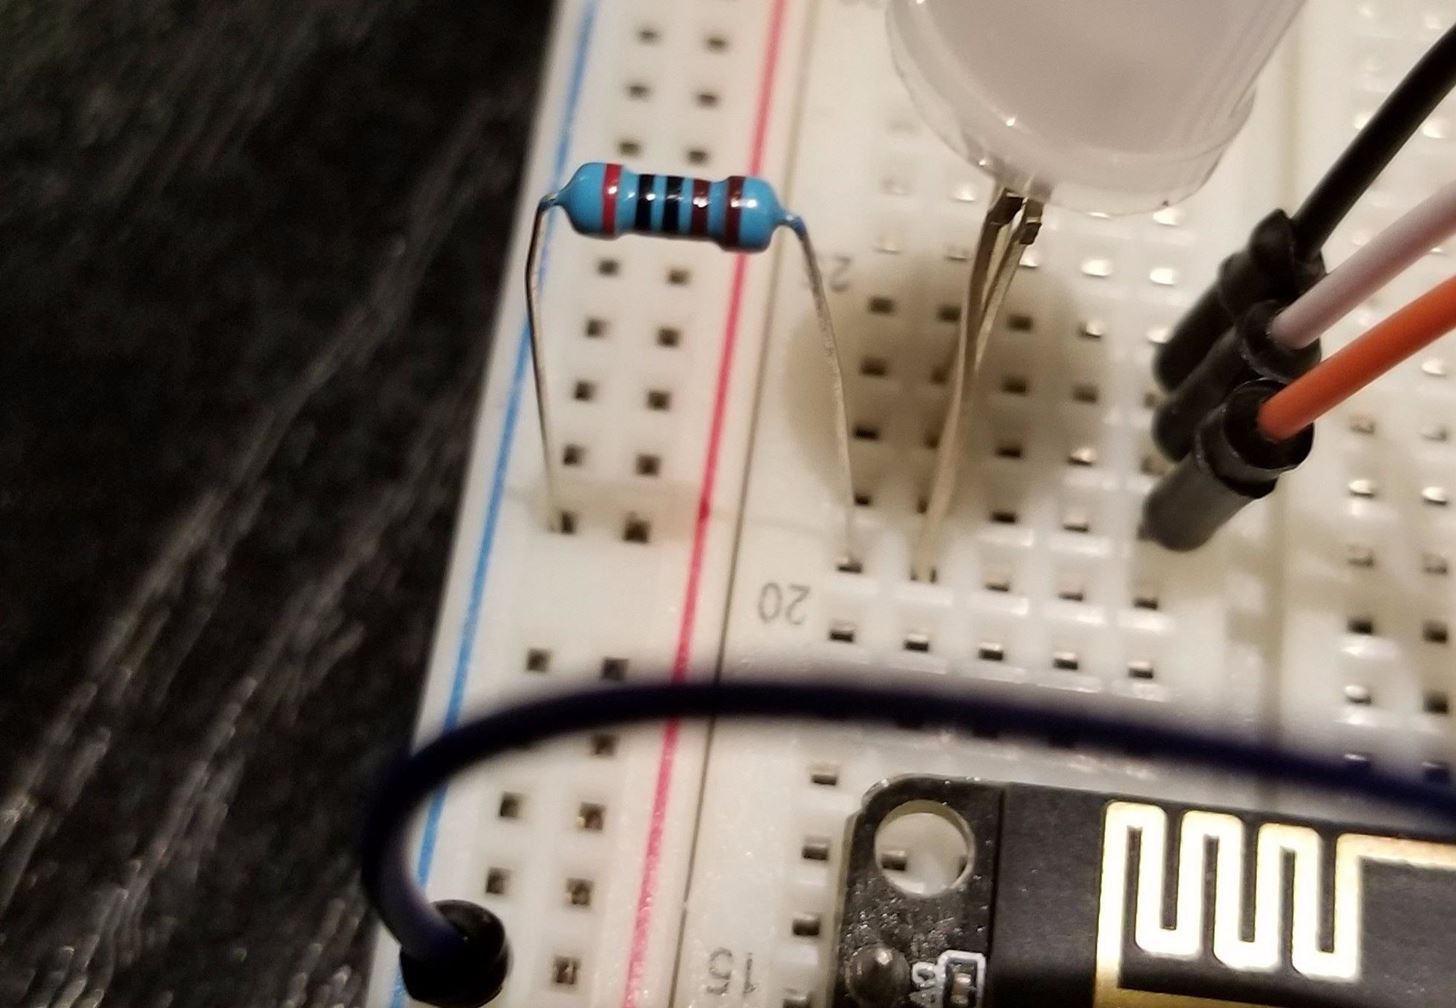 How to Detect When a Device Is Nearby with the ESP8266 Friend Detector